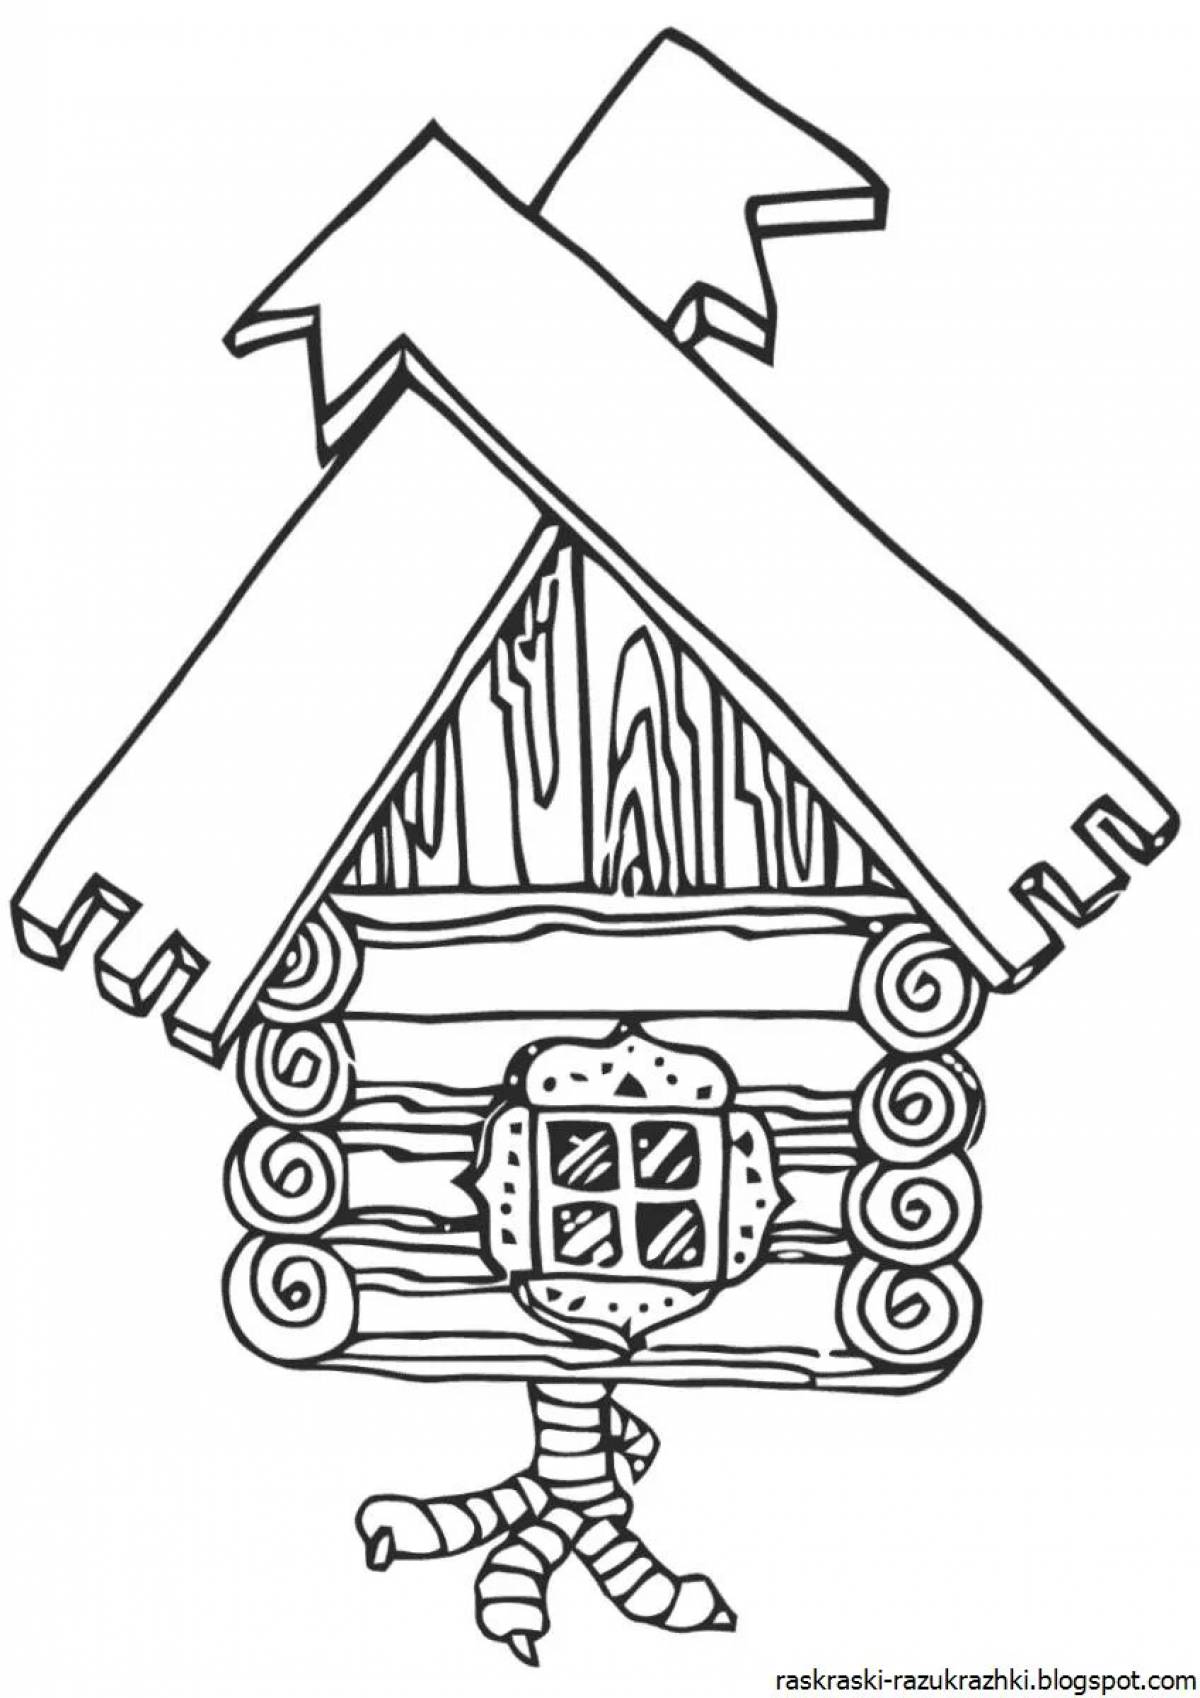 Scary Hut Coloring Page for Kids